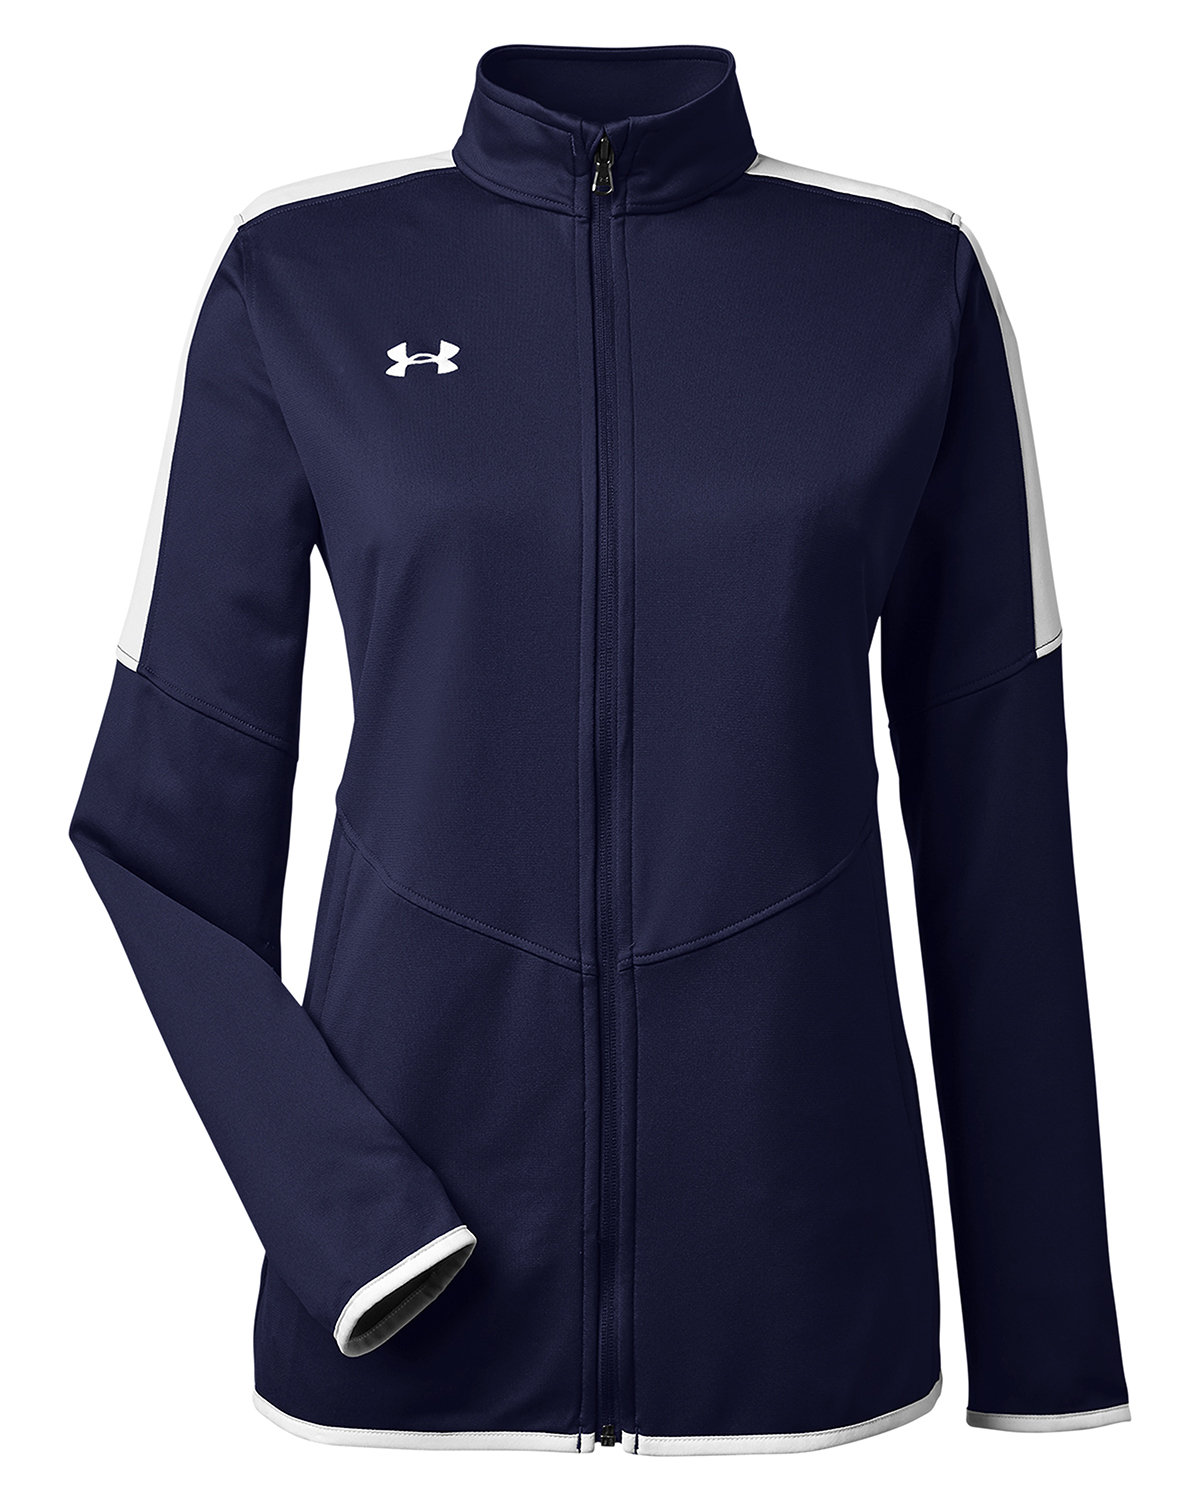 Branded Under Armour Ladies’ Rival Knit Jacket Midnight Navy